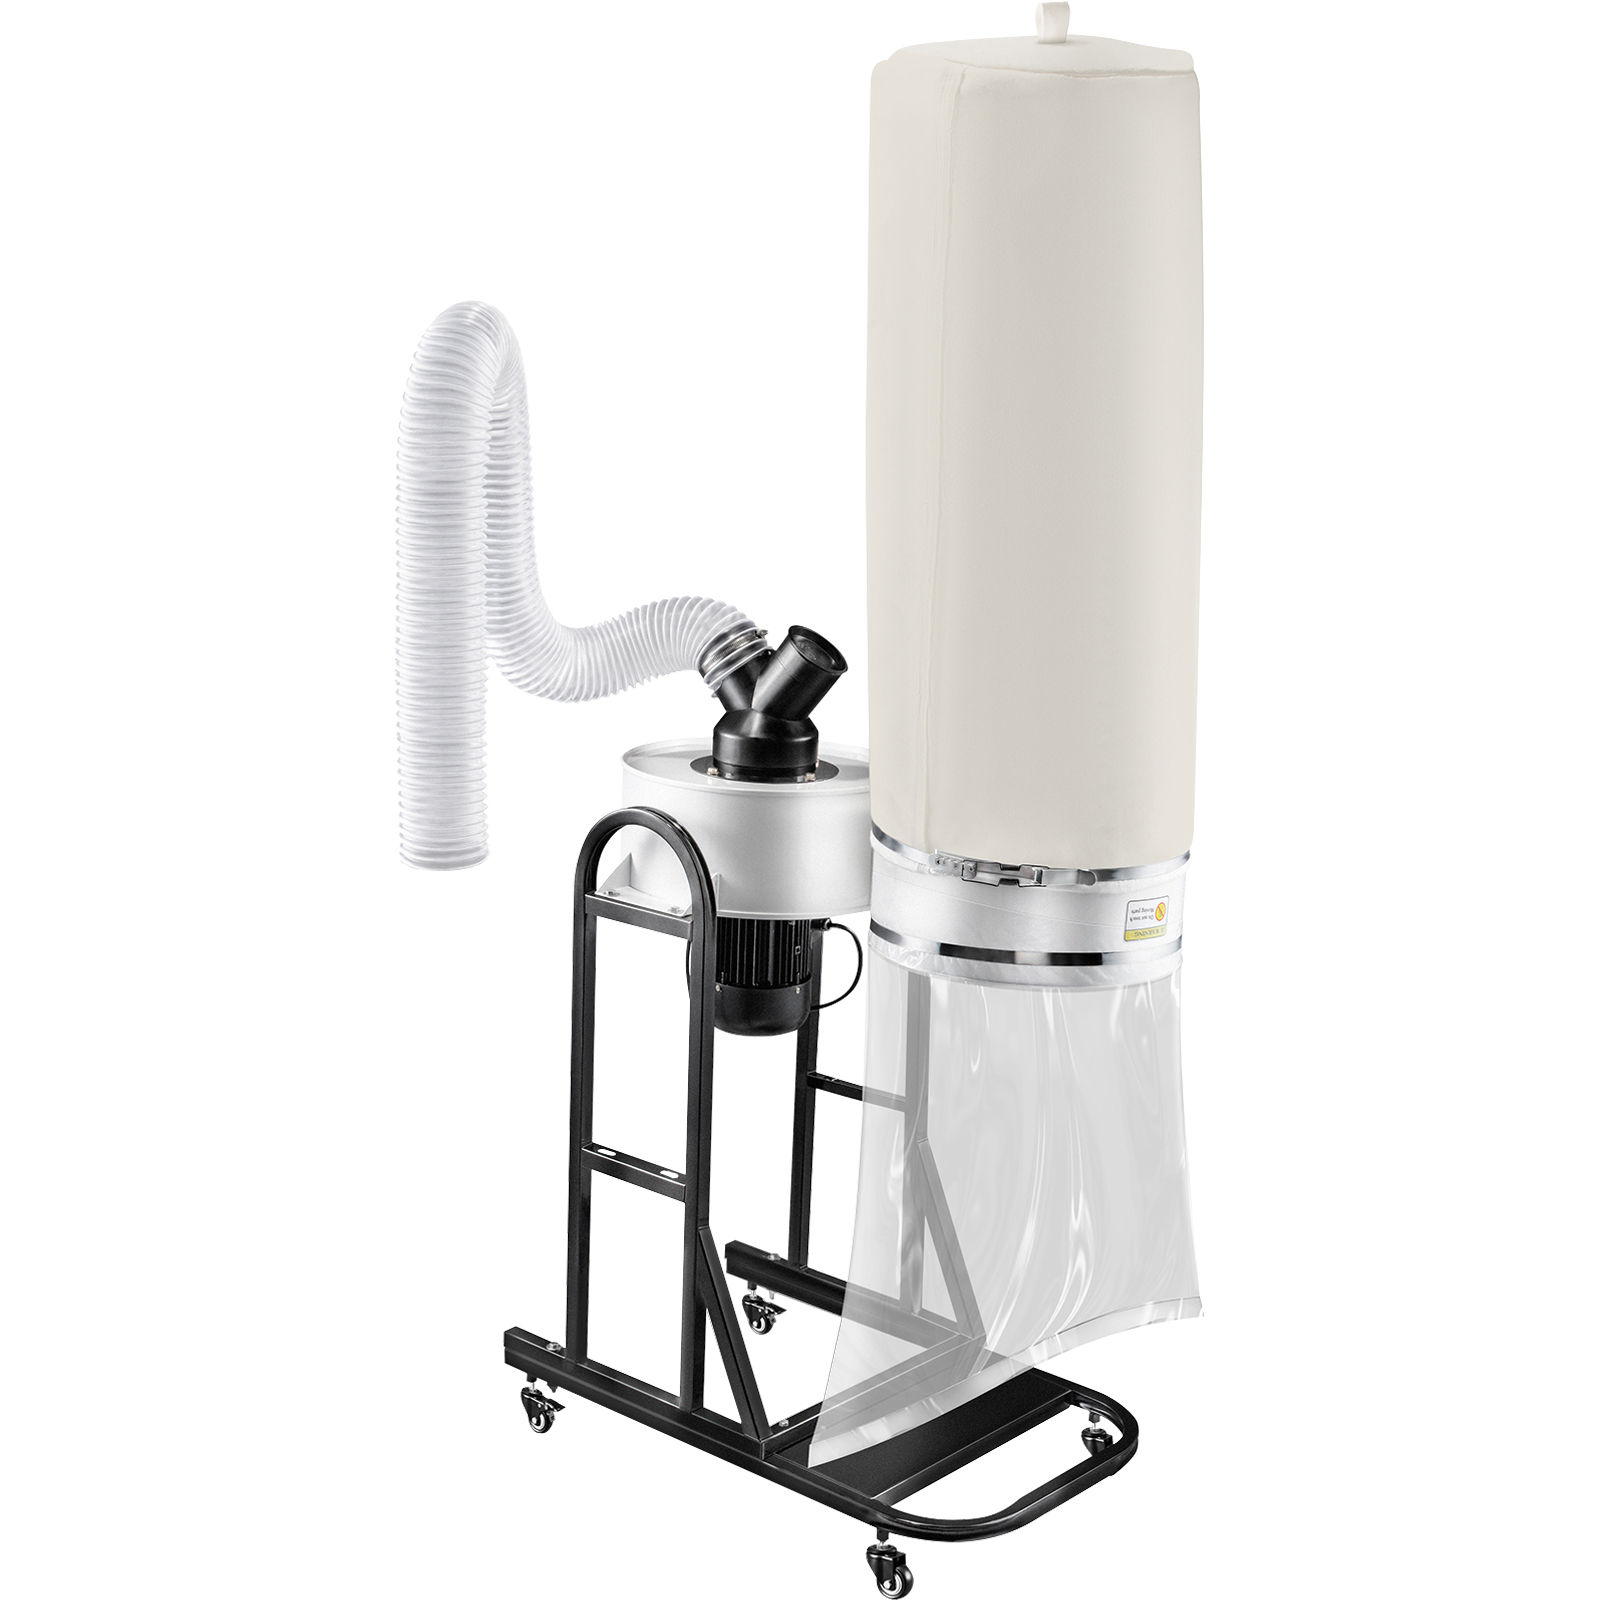 https://d2qc09rl1gfuof.cloudfront.net/product/CCQLDSBDMCFC1IL6Z/dust-collector-m100-1.2.jpg